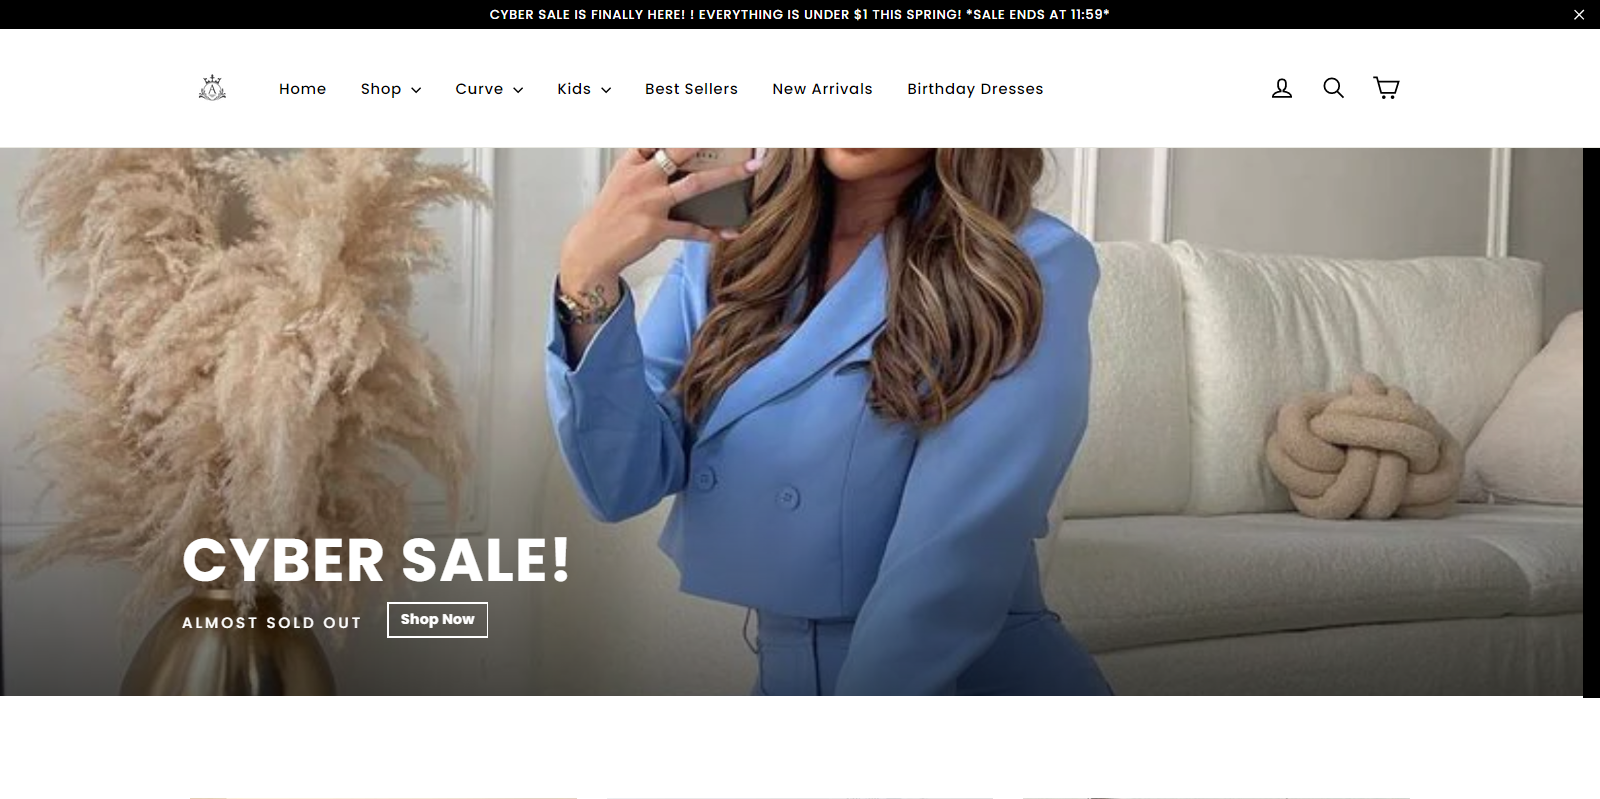 Is Aluxefashion Clothing Store Legit Or 100% Scam? Find Out!